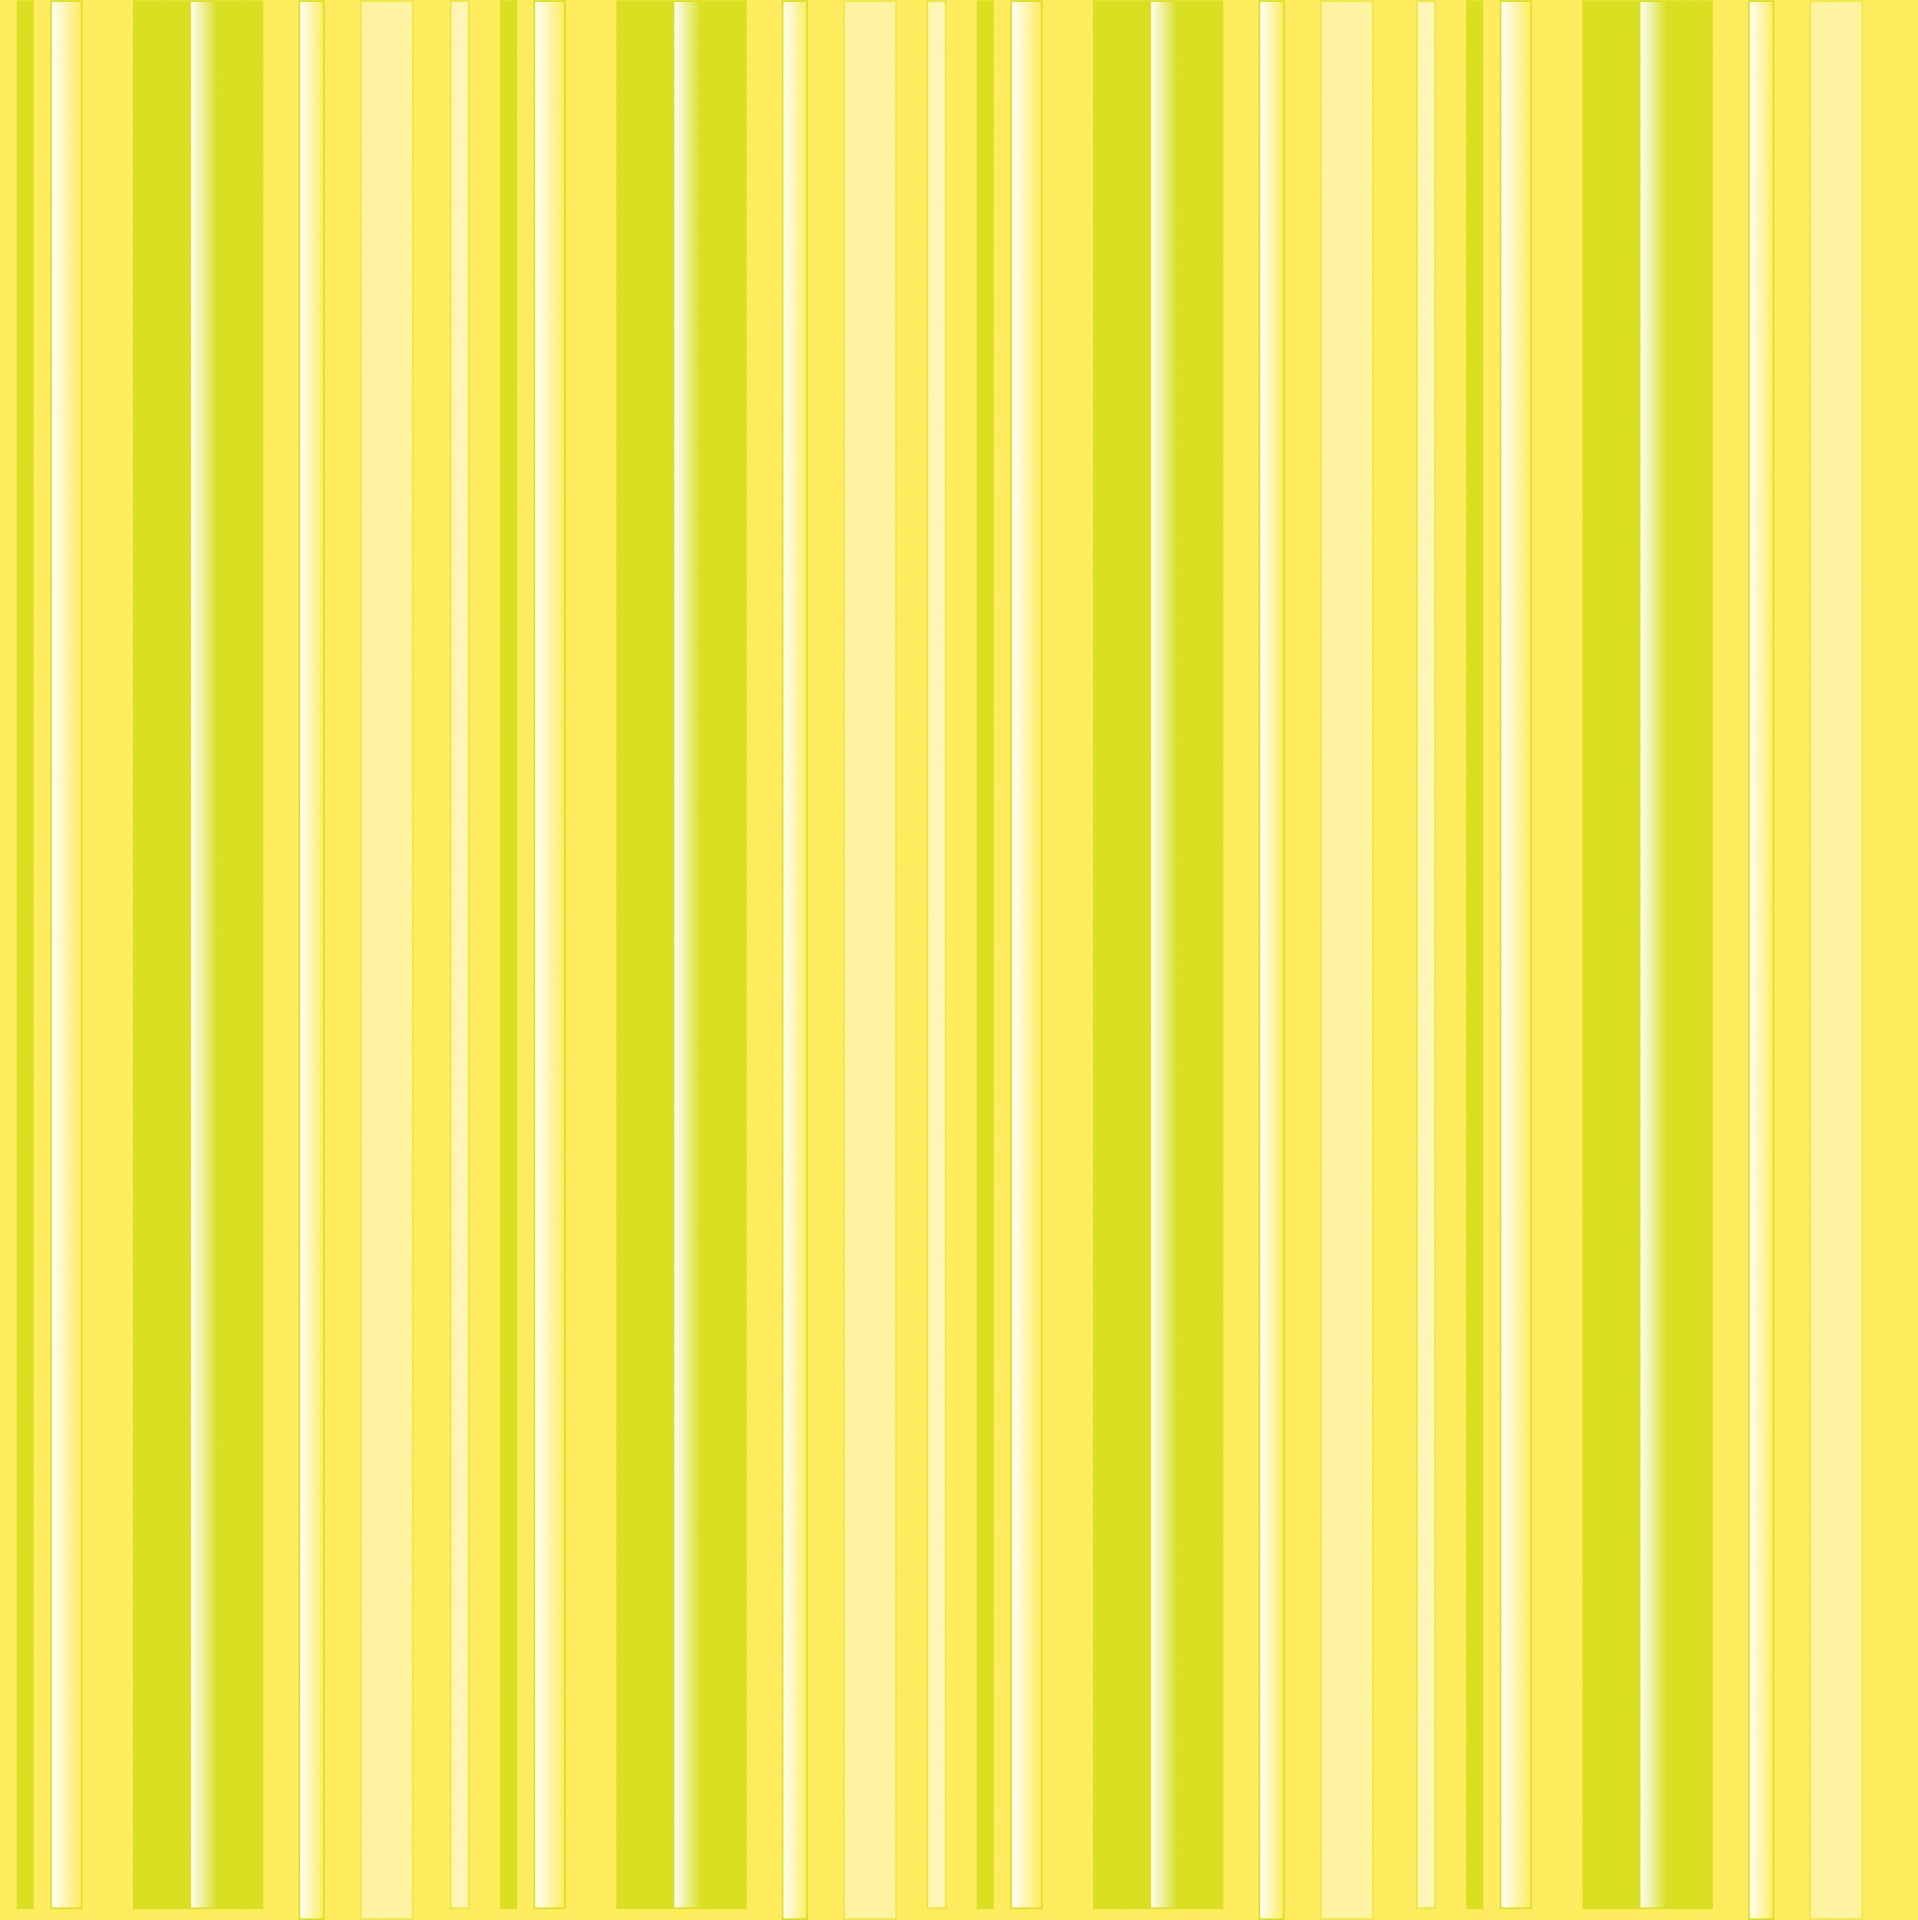 Stripes In Yellow And Green